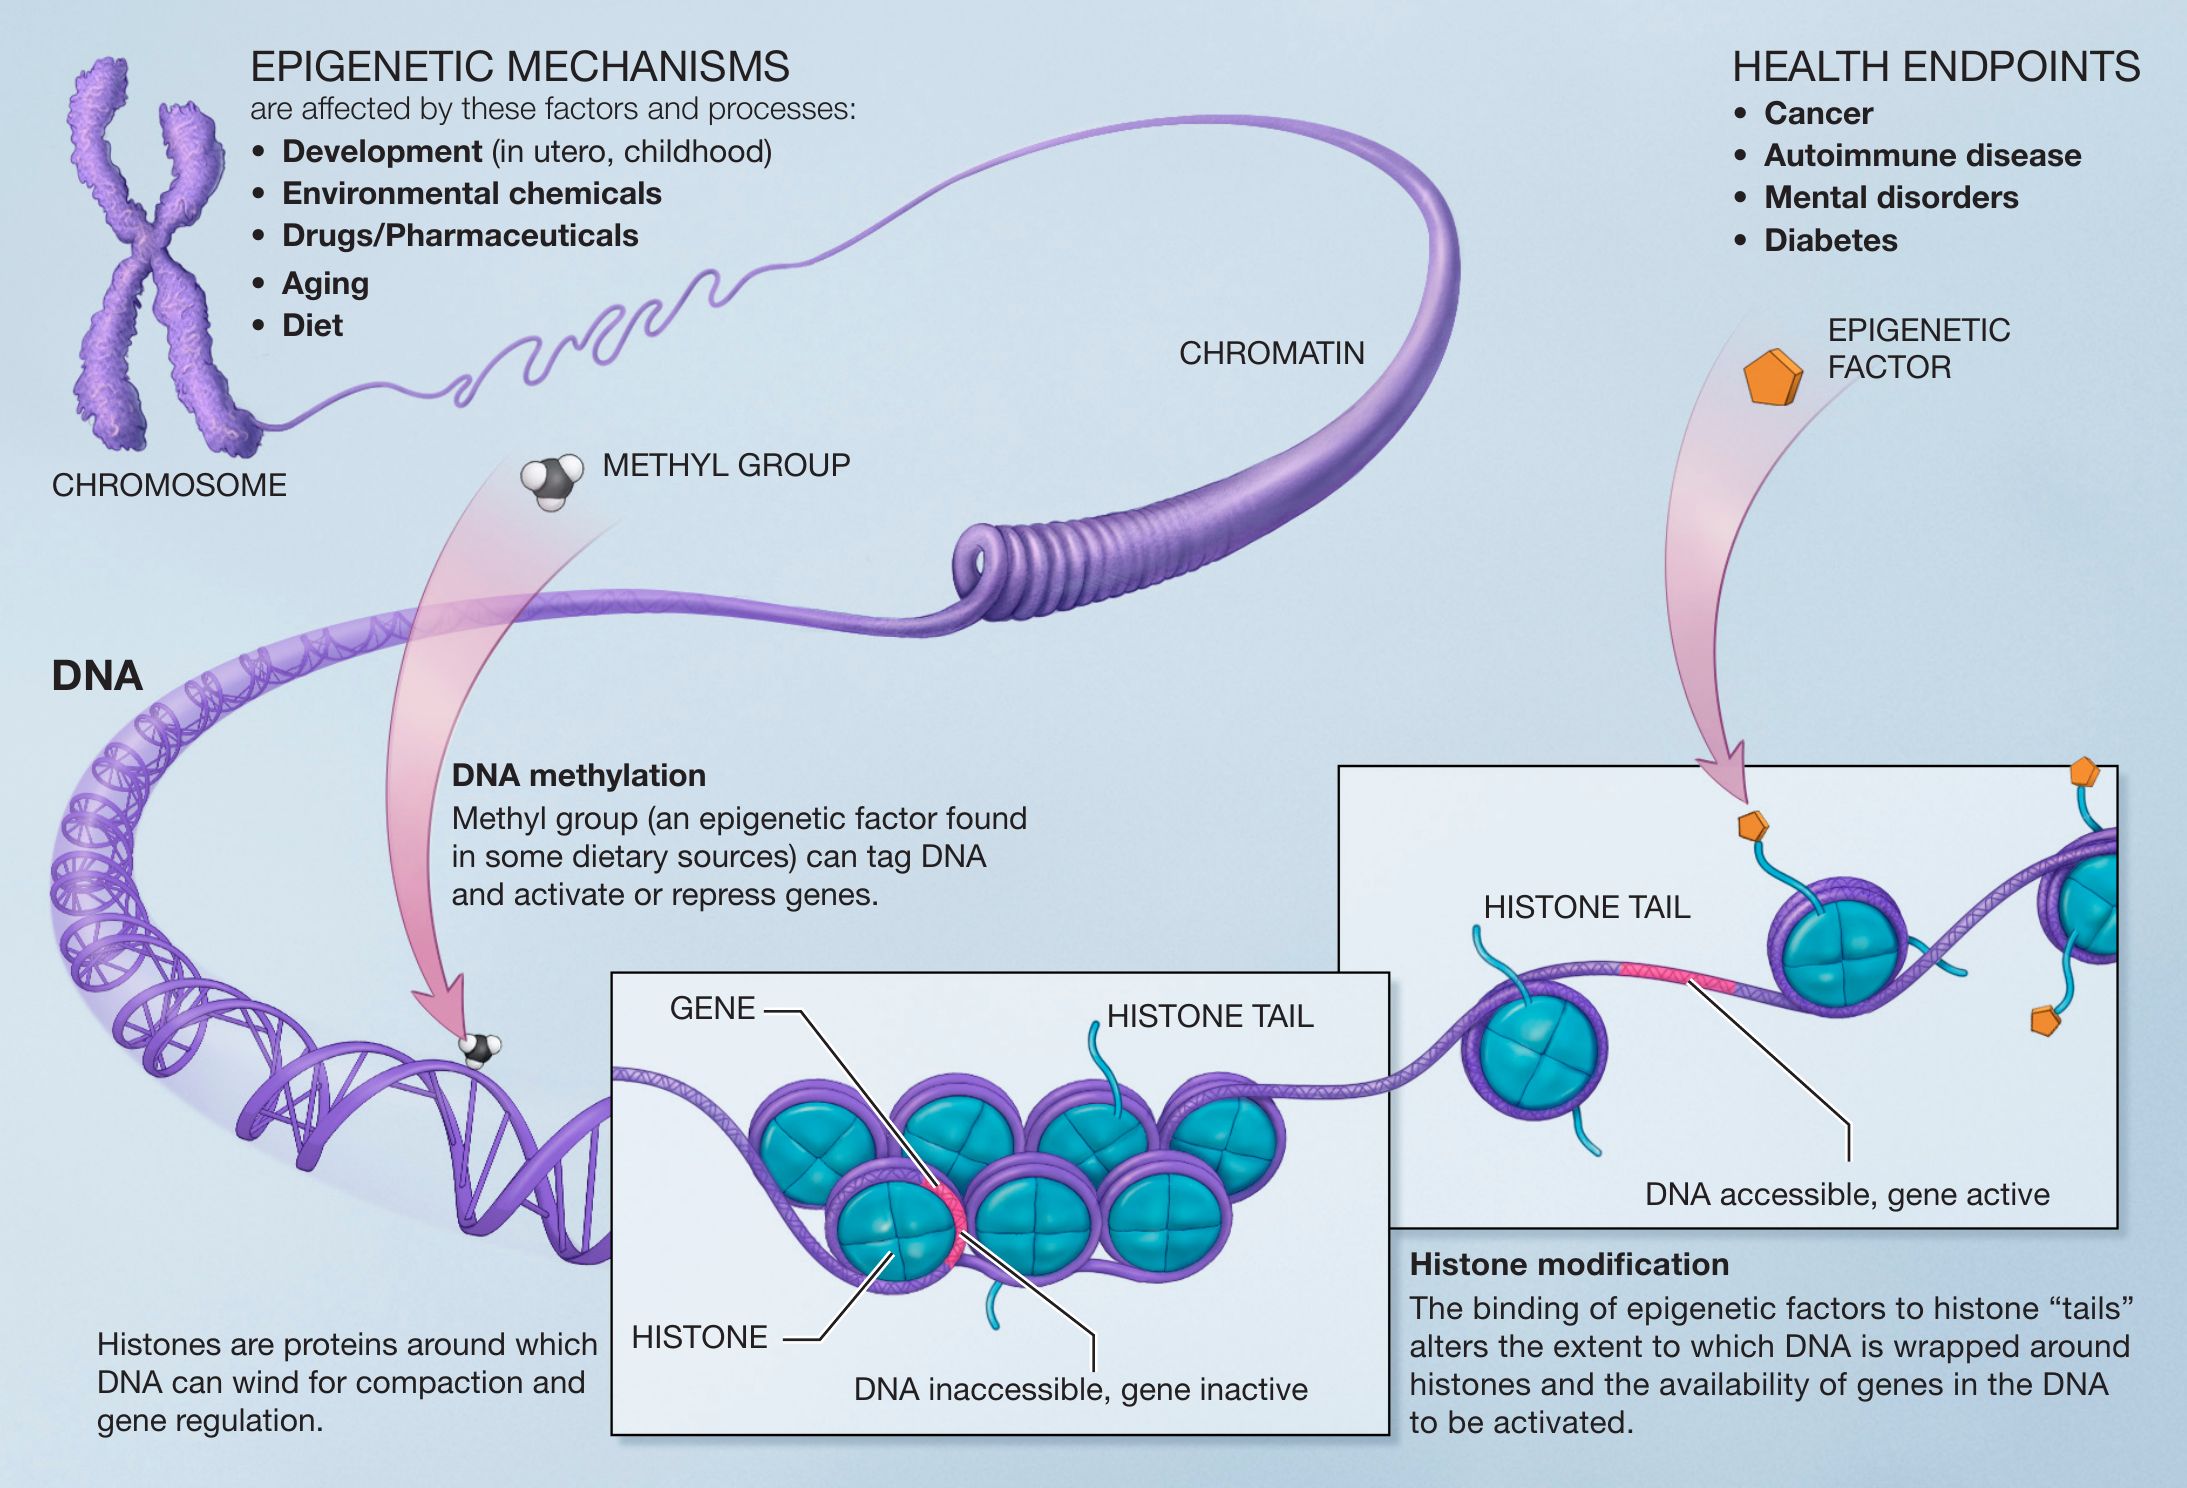 Principes of epigenetics. Small molecules, epigenetic markers, interact with the DNA and histones. They can cause a gene to be accessible or inaccessible for RNA transcription (Source: NIH, Wikipedia)